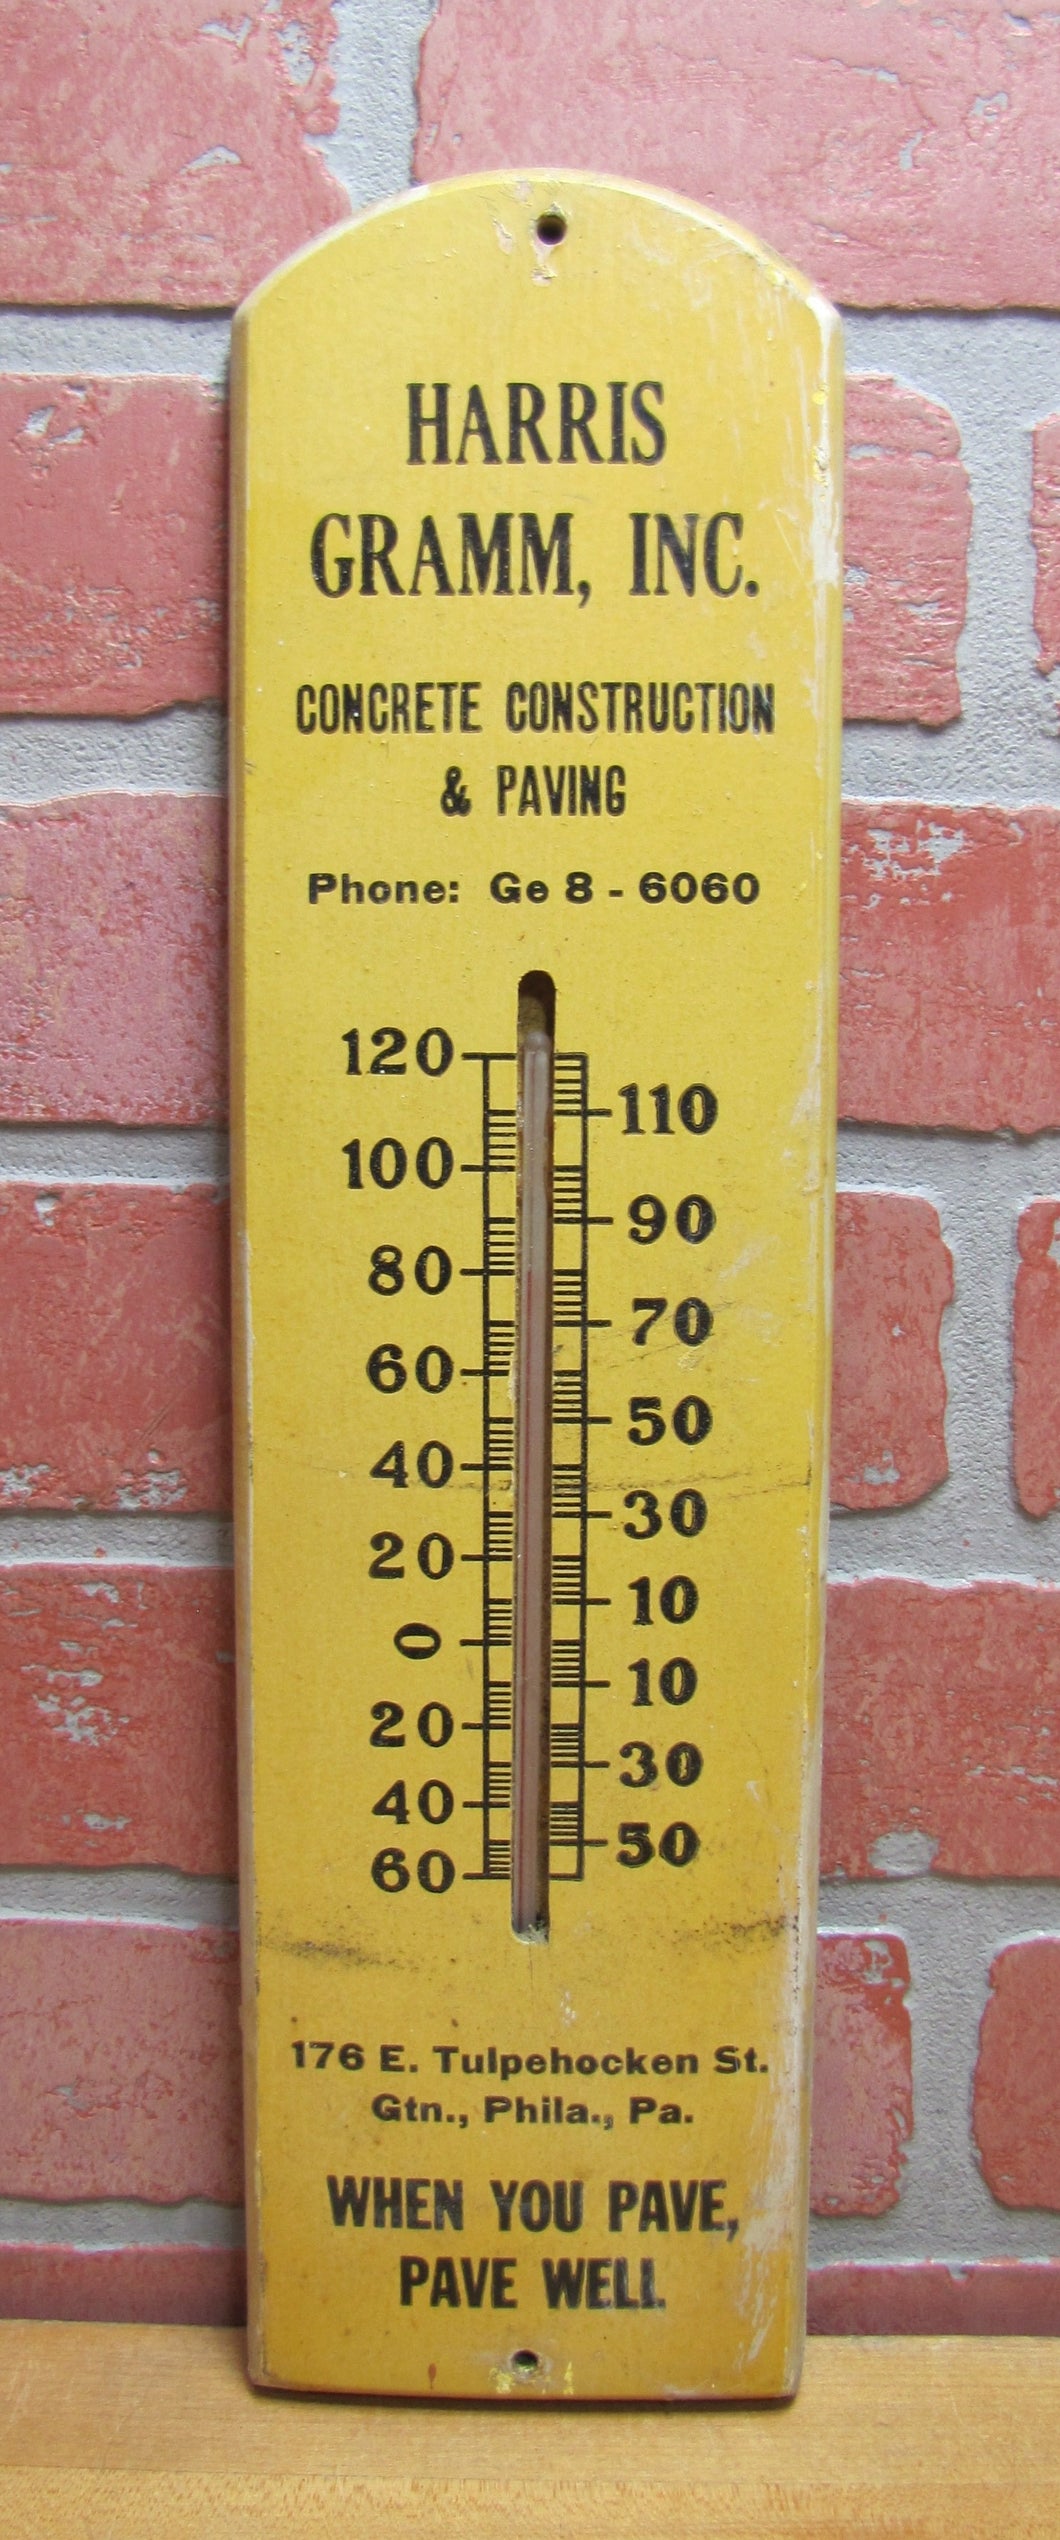 HARRIS GRAMM CONCRETE CONSTRUCTION & PAVING PHILA PA Old Wooden Advertising Thermometer Sign